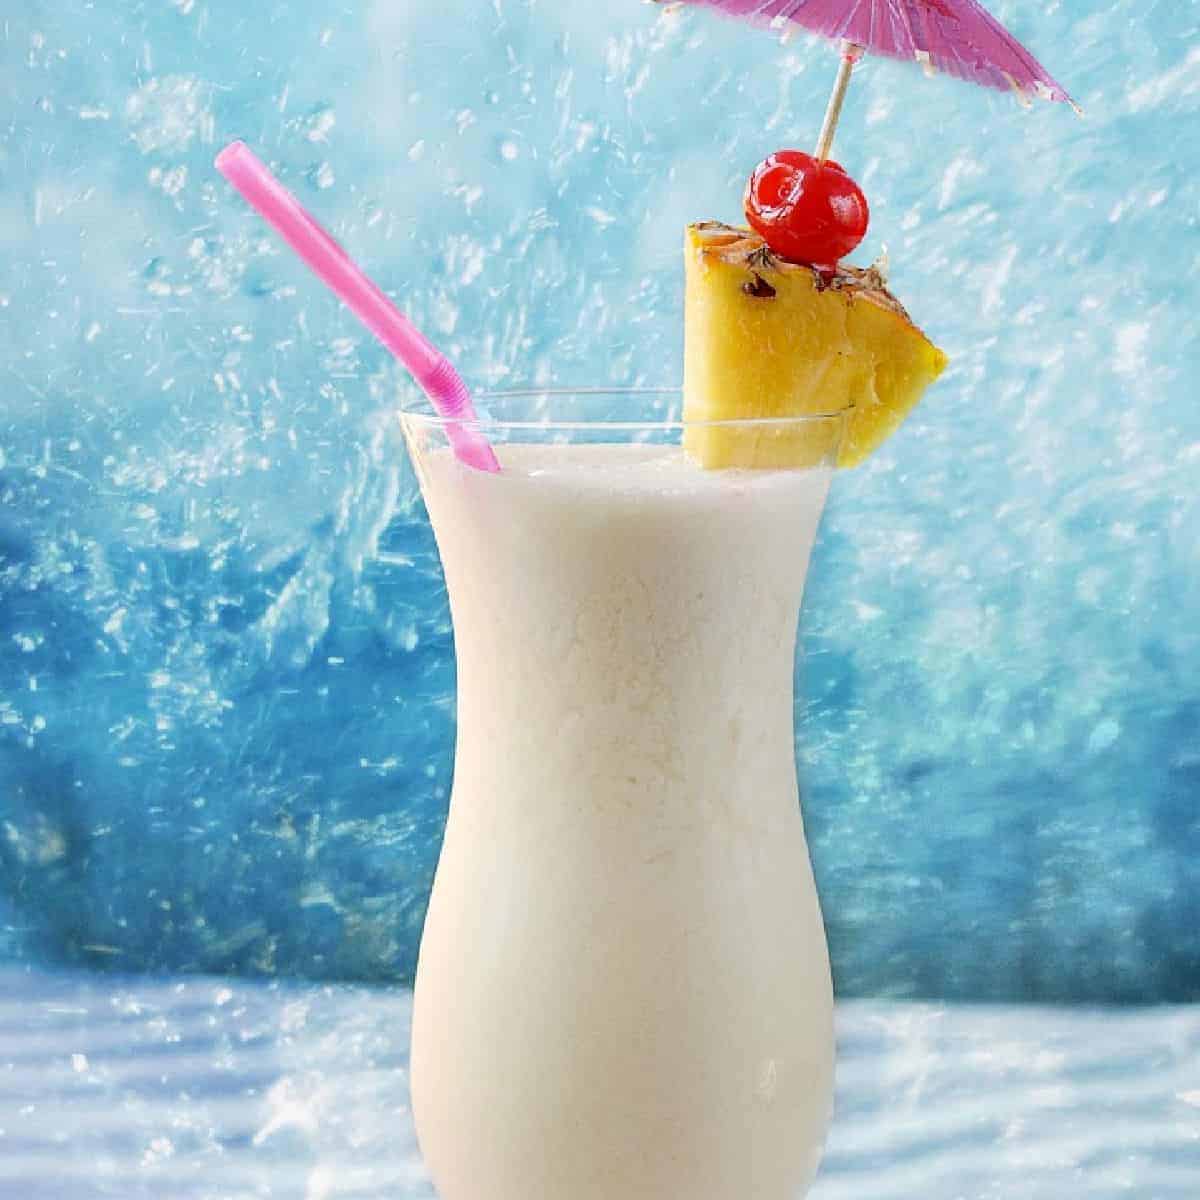 A creamy white cocktail in a hurricane glass with a pink straw, pineapple wedge, cherry and pink paper umbrella.